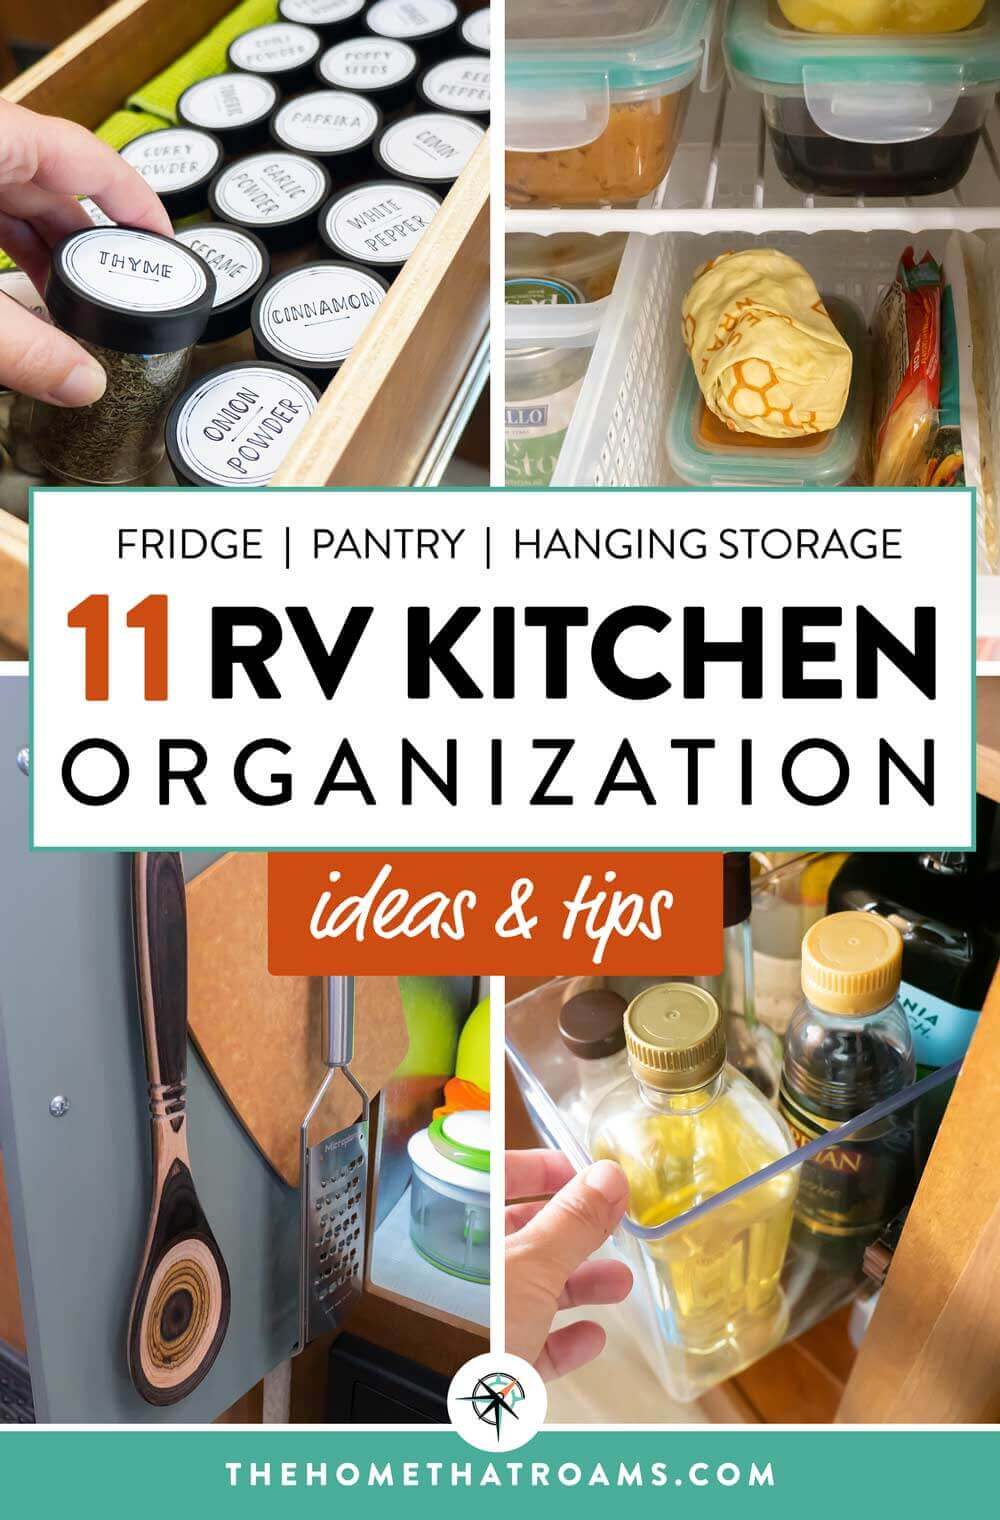 11 Helpful Tips for Organizing an RV Kitchen